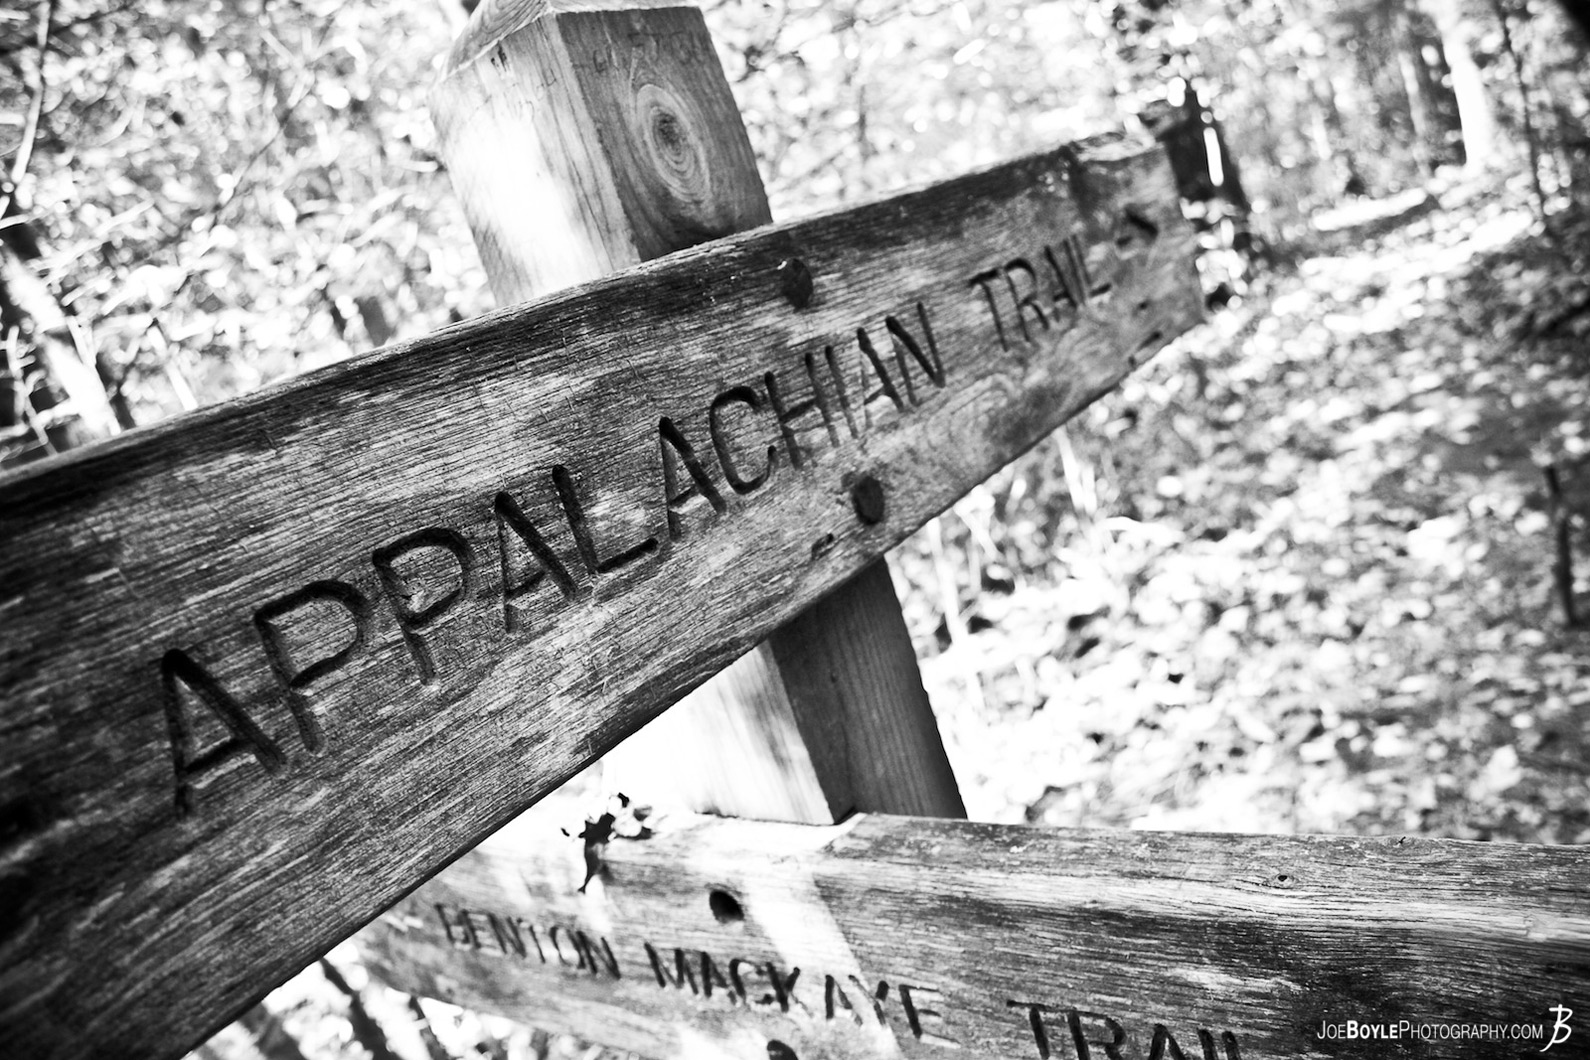 This is one of the first signs on the Appalachian Trail near Springer Mountain.